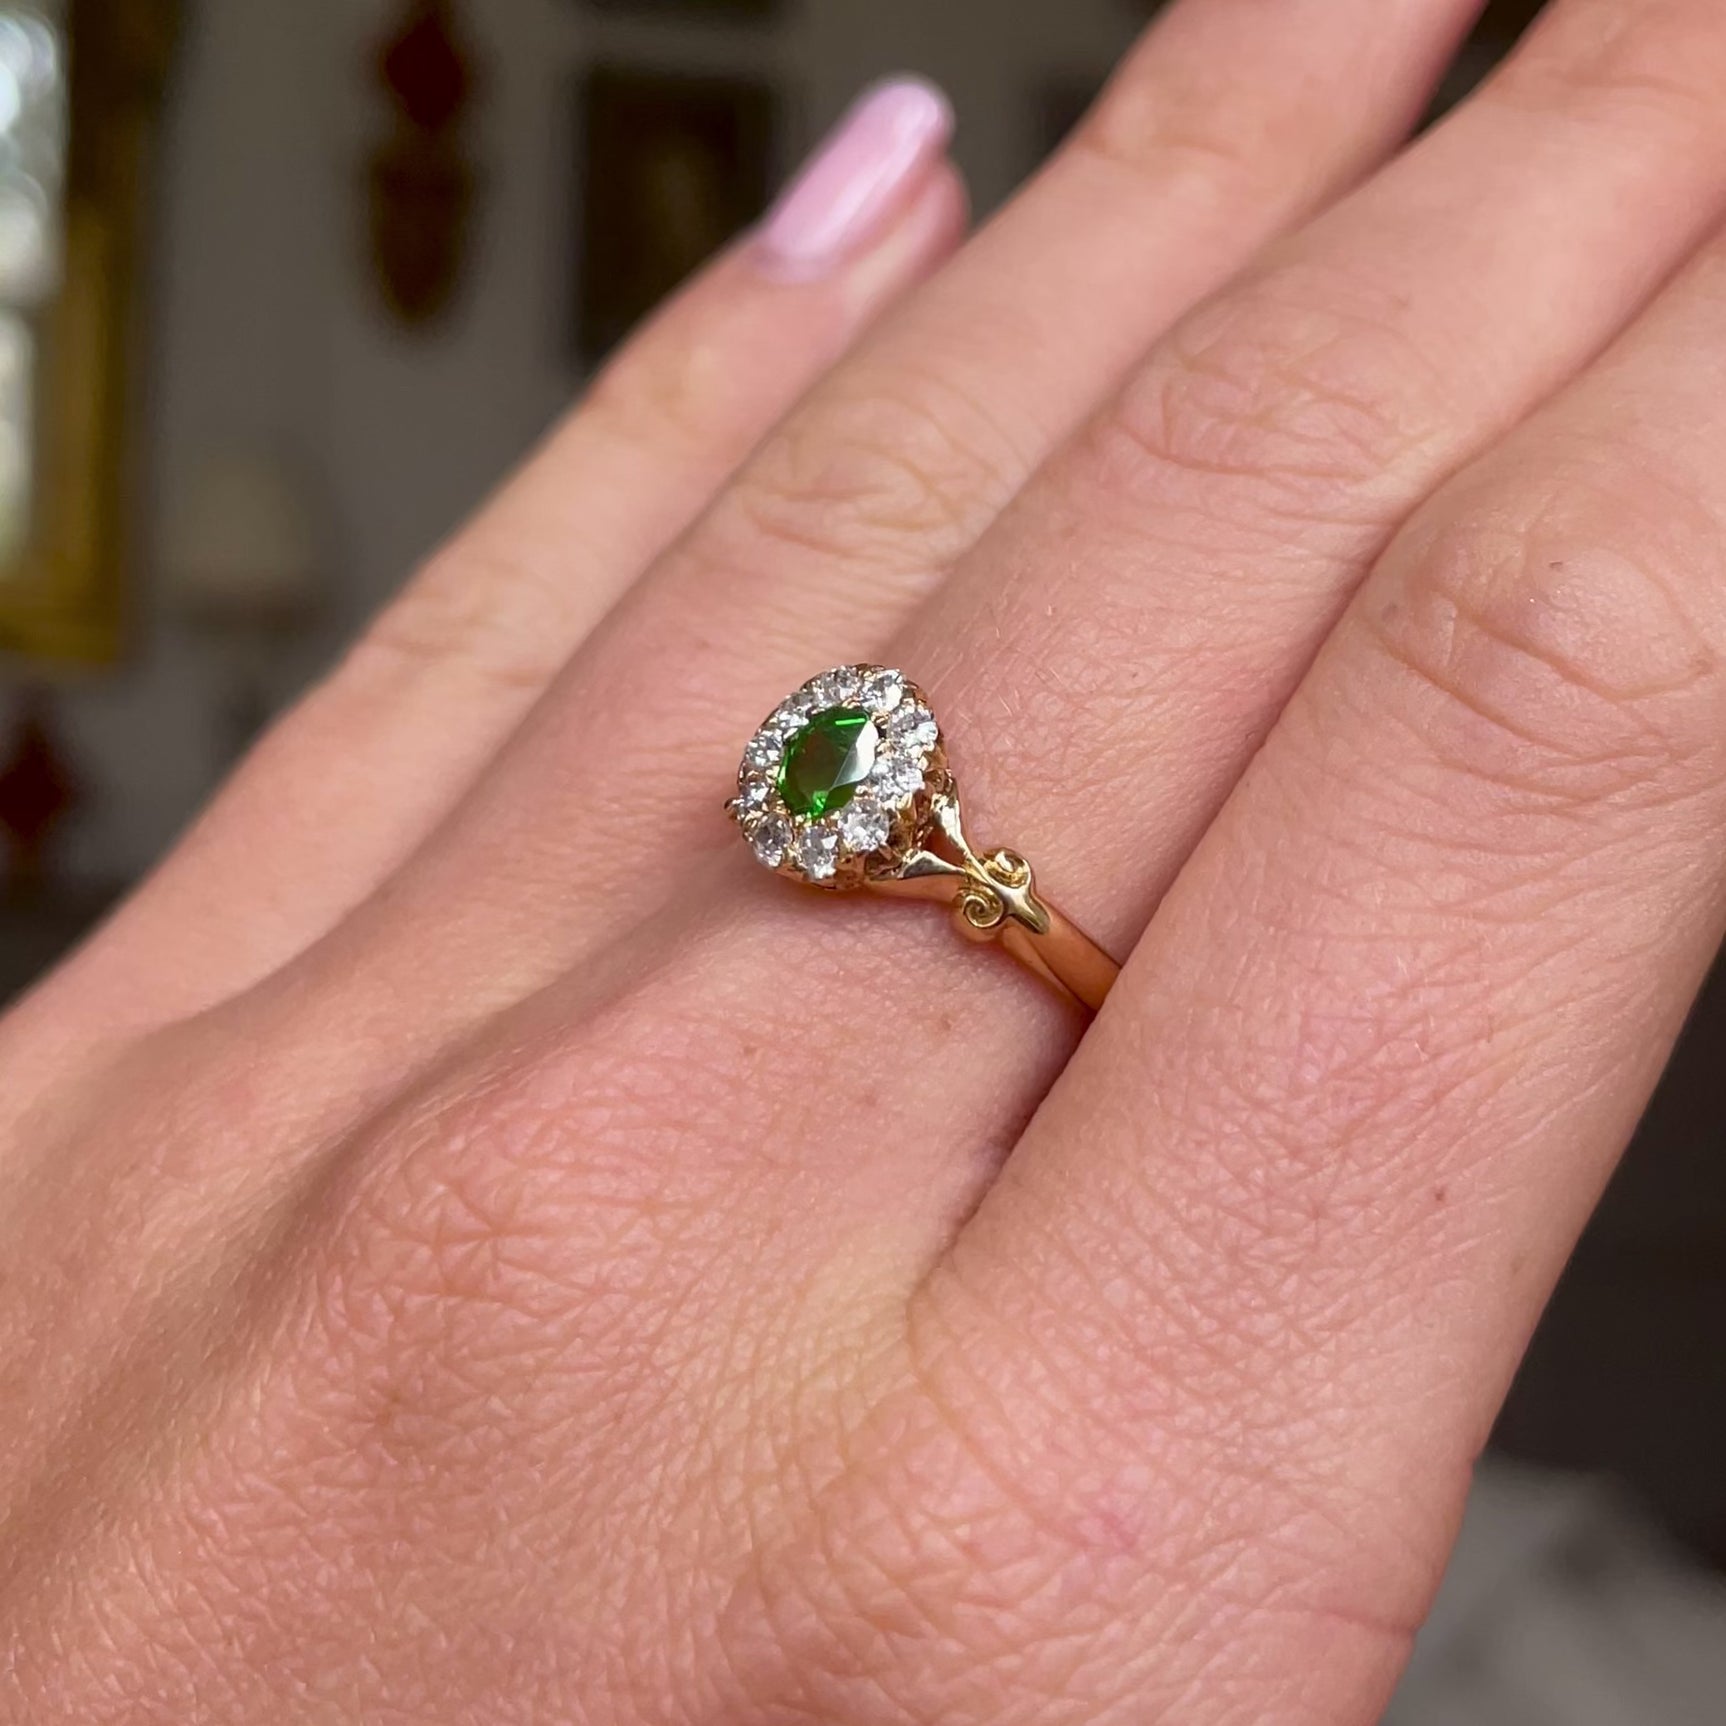 Edwardian, demantoid garnet and diamond cluster ring, worn on hand and rotated to give perspective.